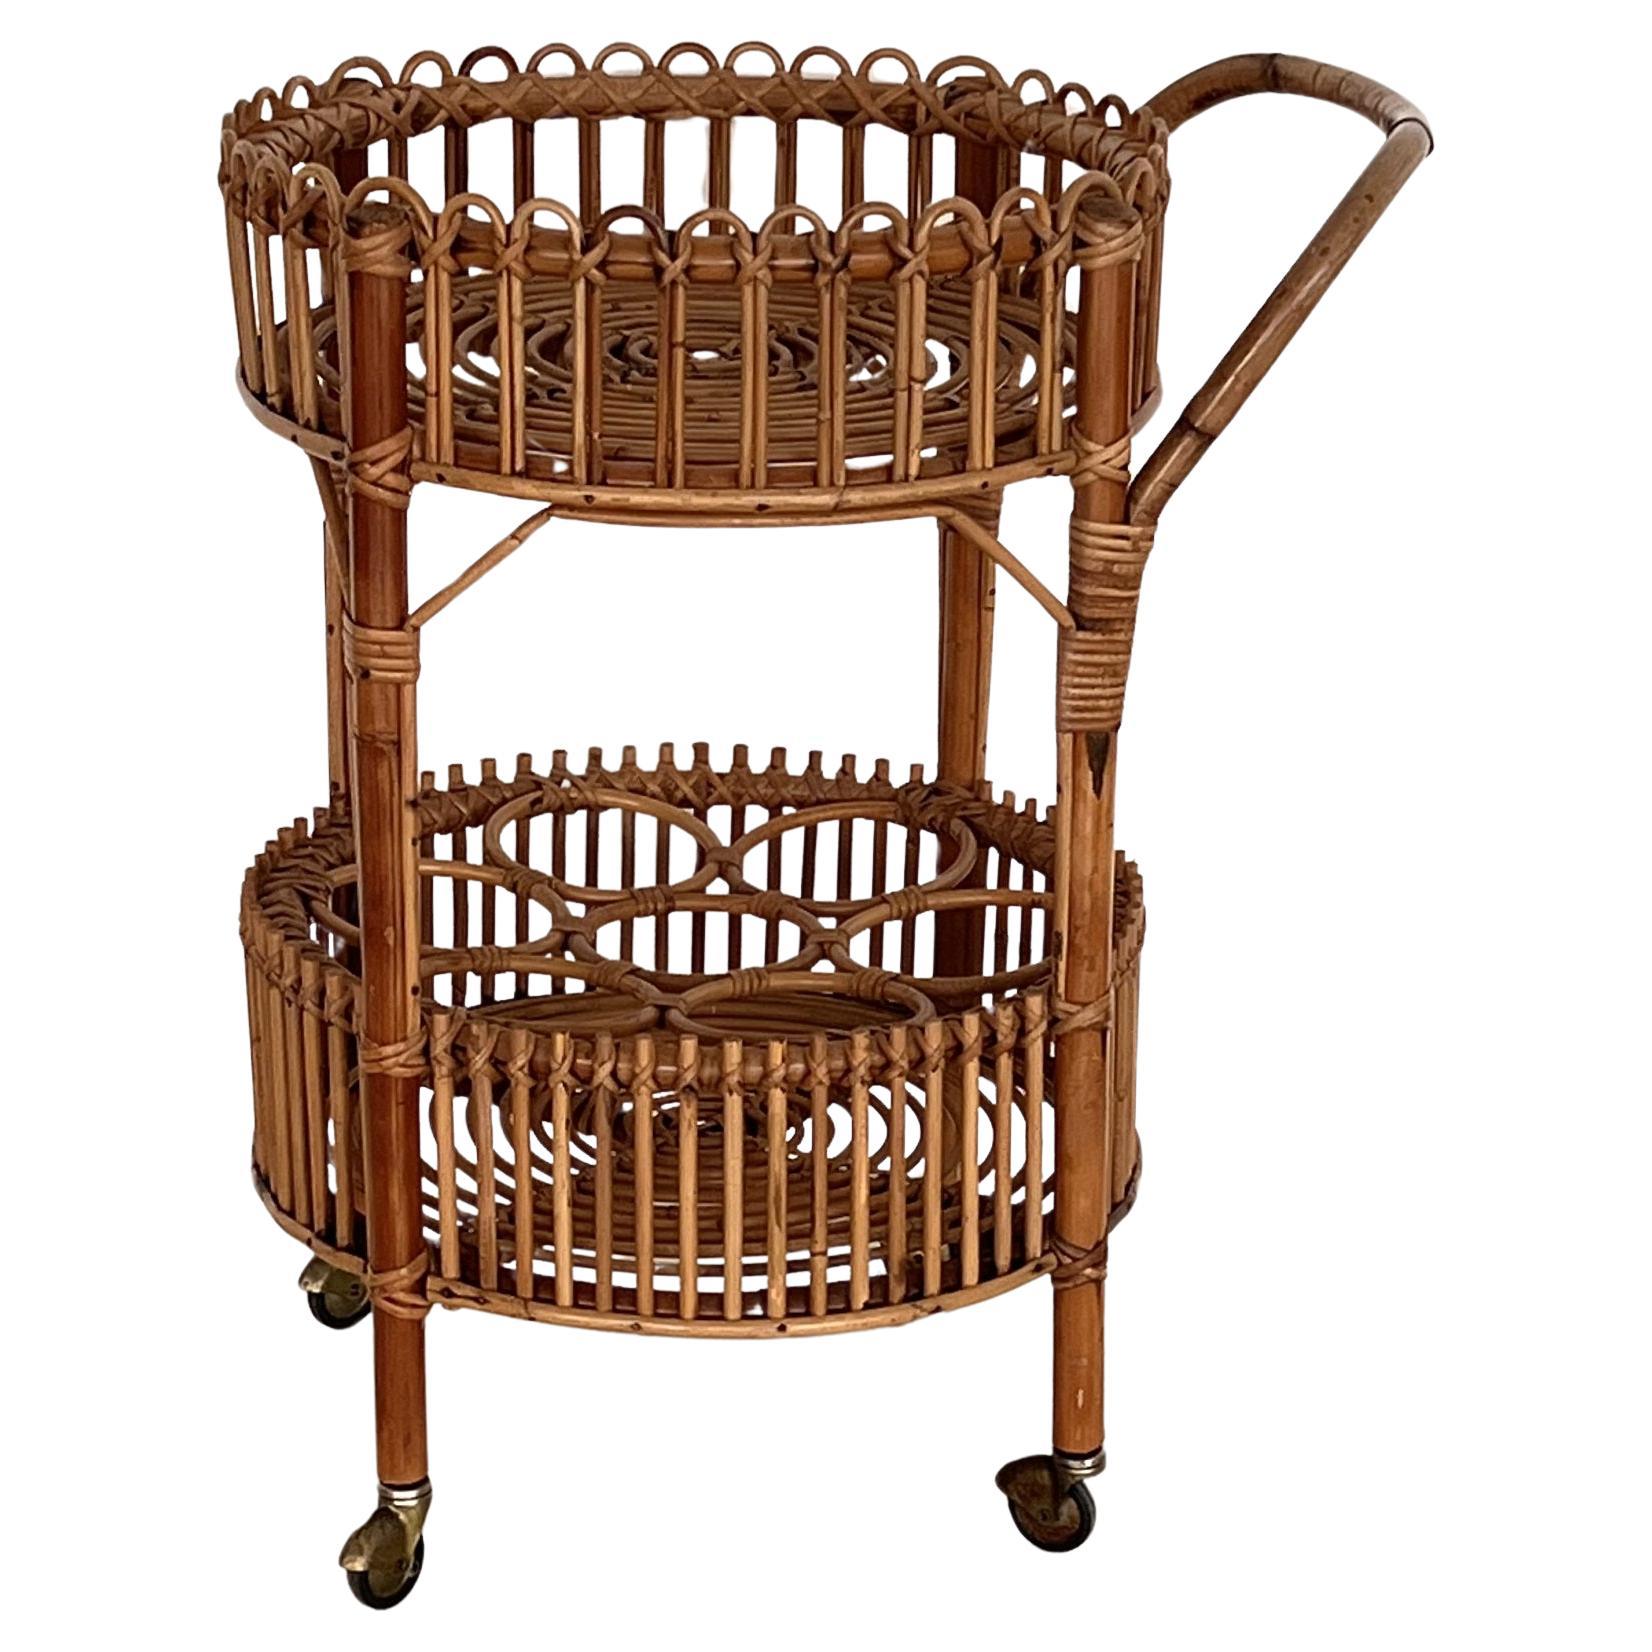 Italian Mid-Century Bamboo and Rattan Serving Bar Cart or Trolley, 1970